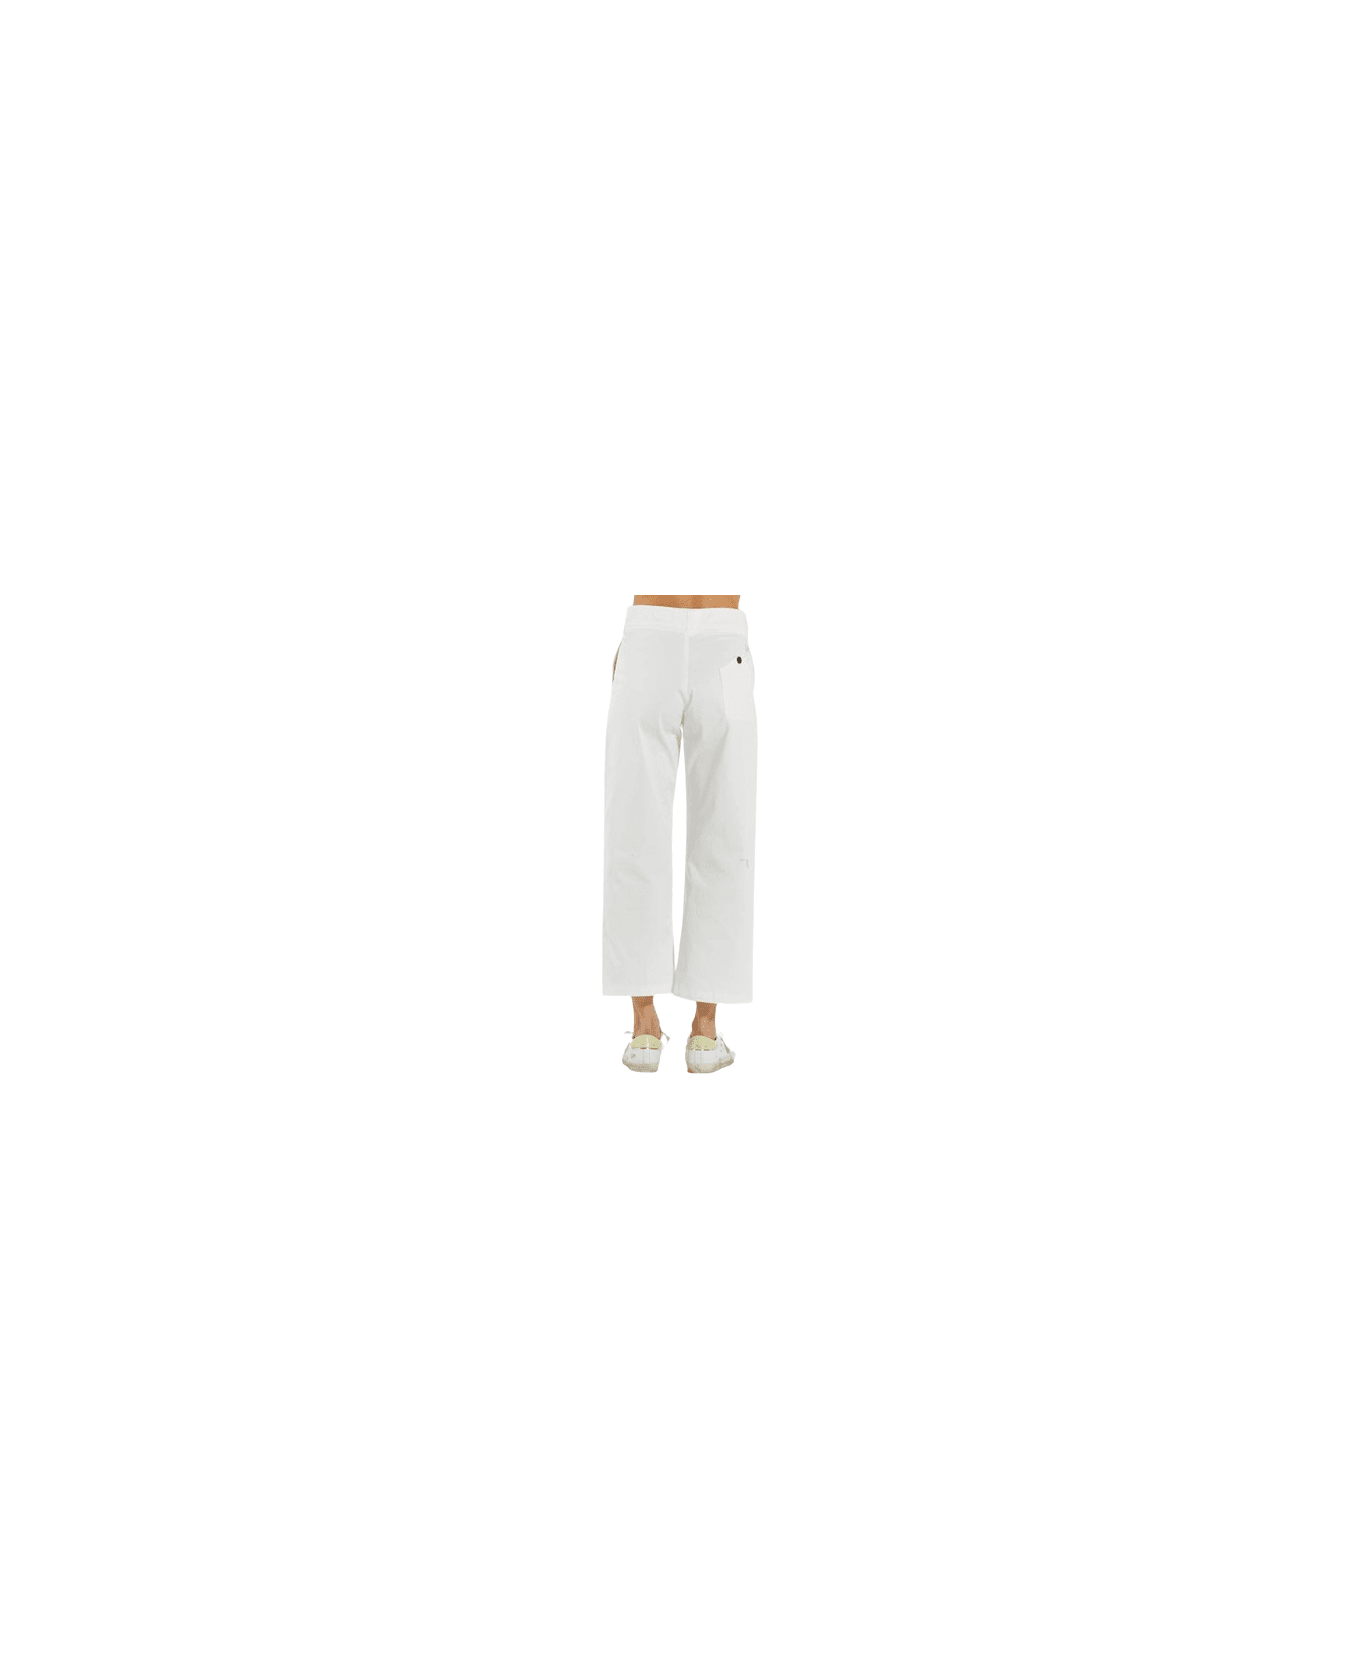 Department Five Trousers - Bianco ボトムス